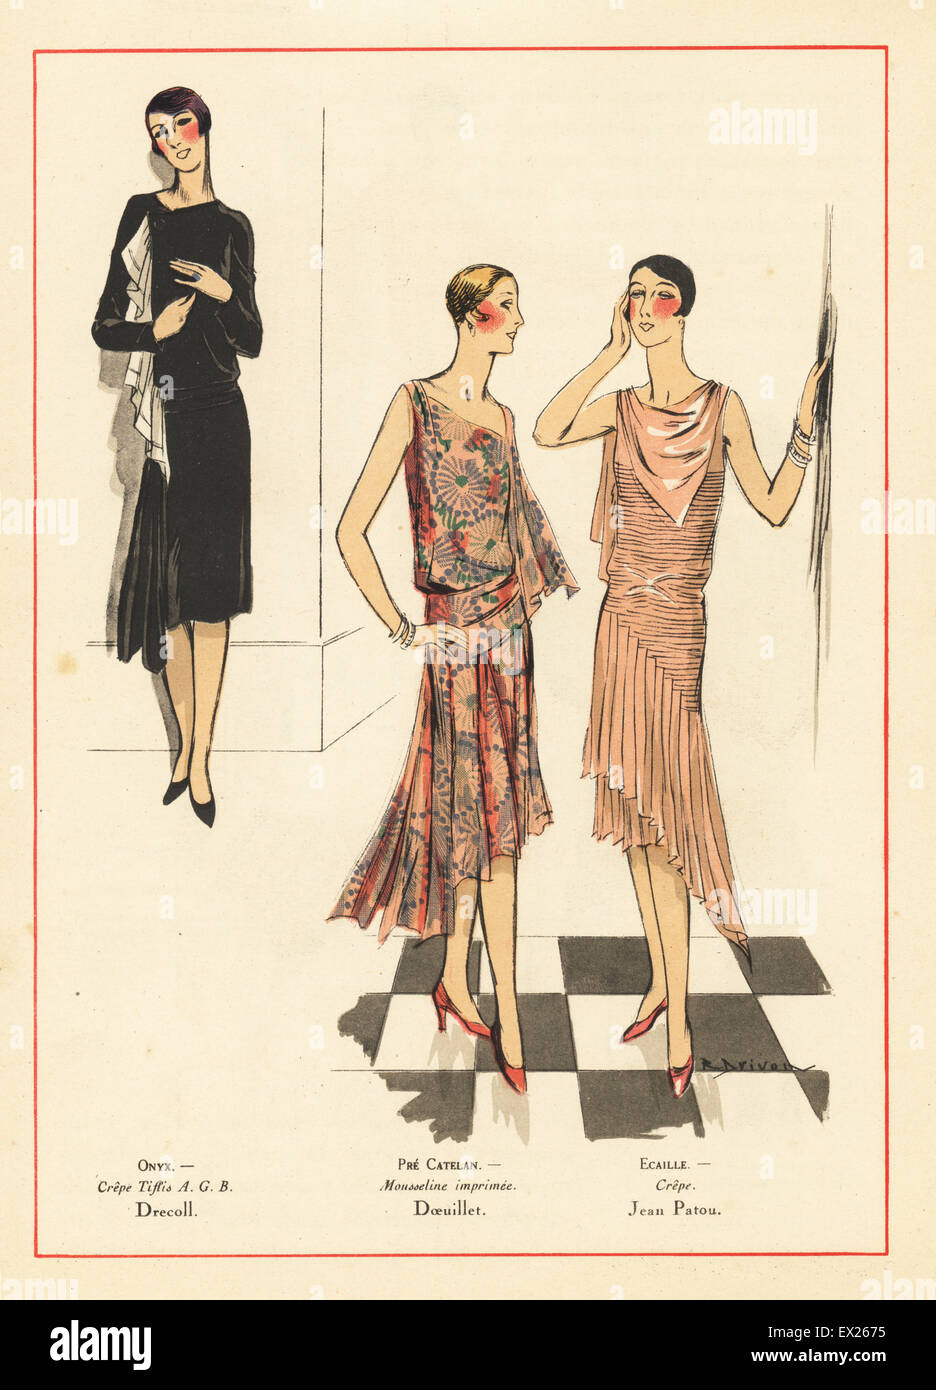 Women in evening dresses of crepe Tiffis, printed muslin and crepe. Lithograph with pochoir (stencil) handcolour after an illustration by R. Drivor from the luxury fashion magazine Art, Gout, Beaute, Paris, 1923. Stock Photo